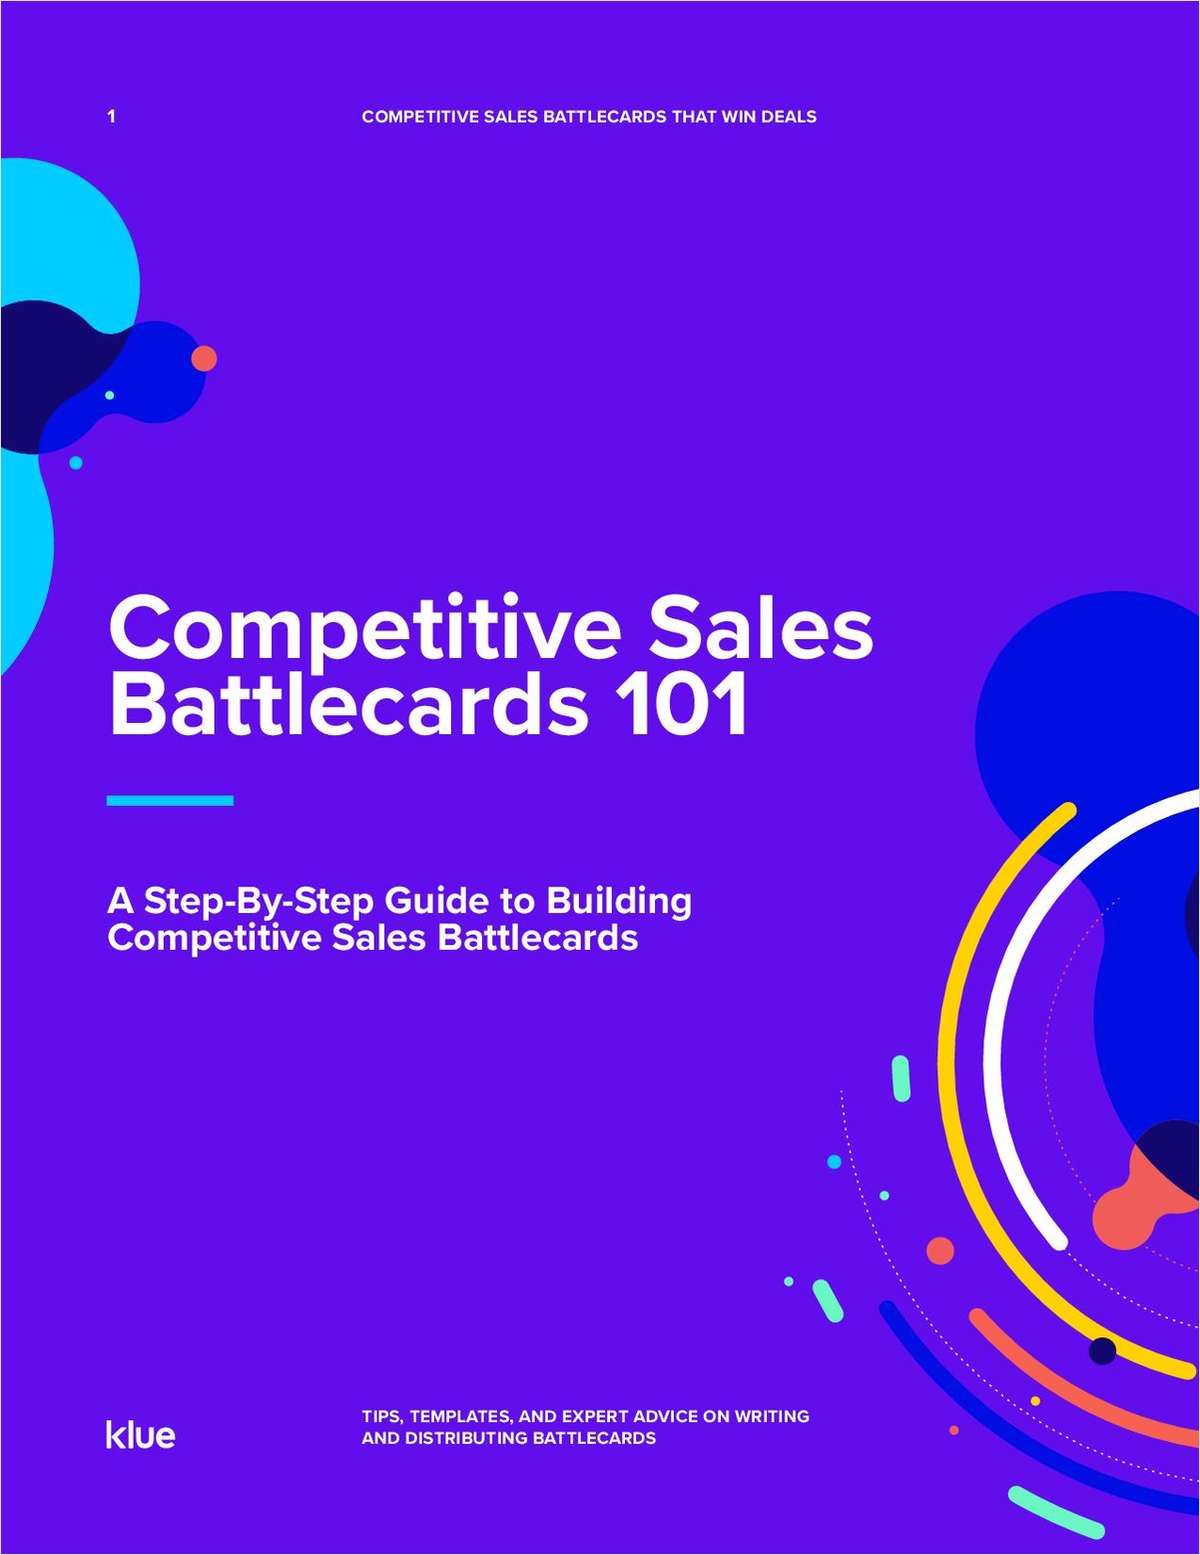 Sales Battlecard Templates Your Reps Will Love